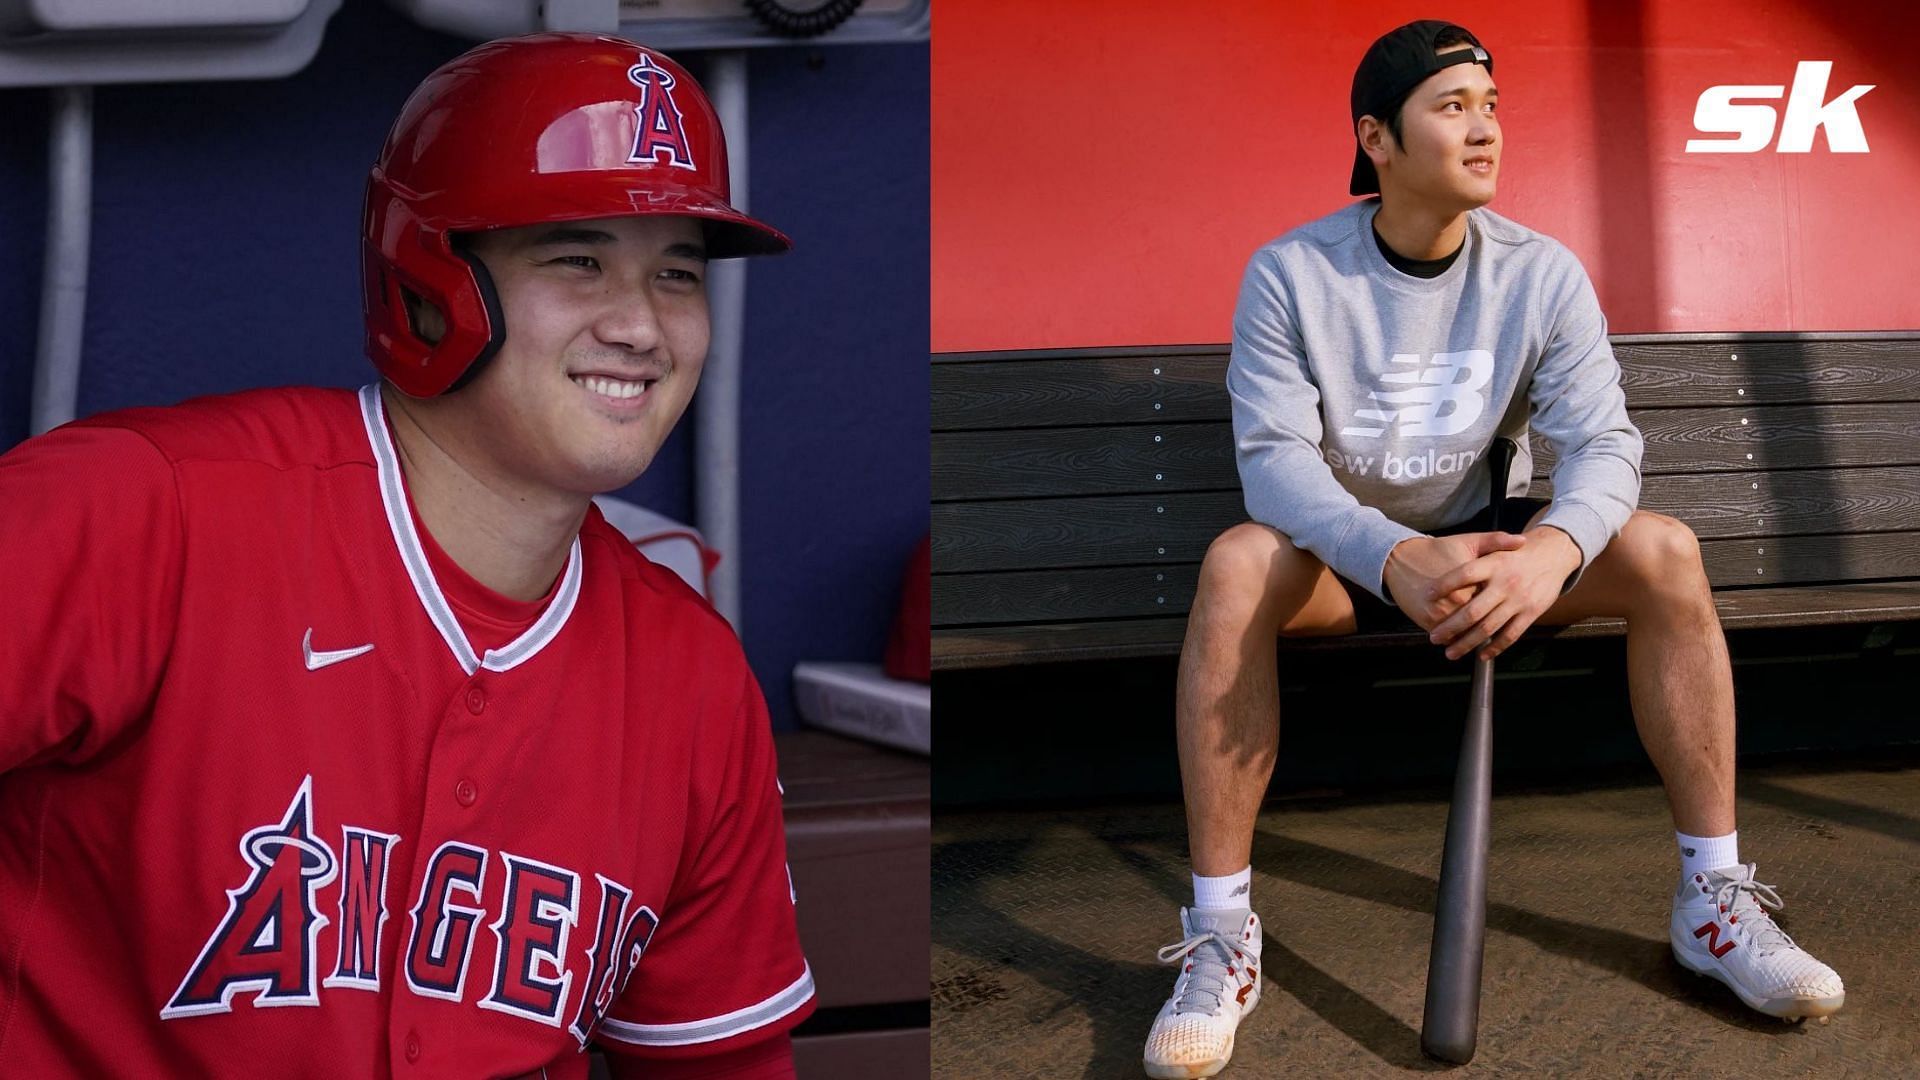 Shohei Ohtani brings in an estimated $40 million per year from endorsements